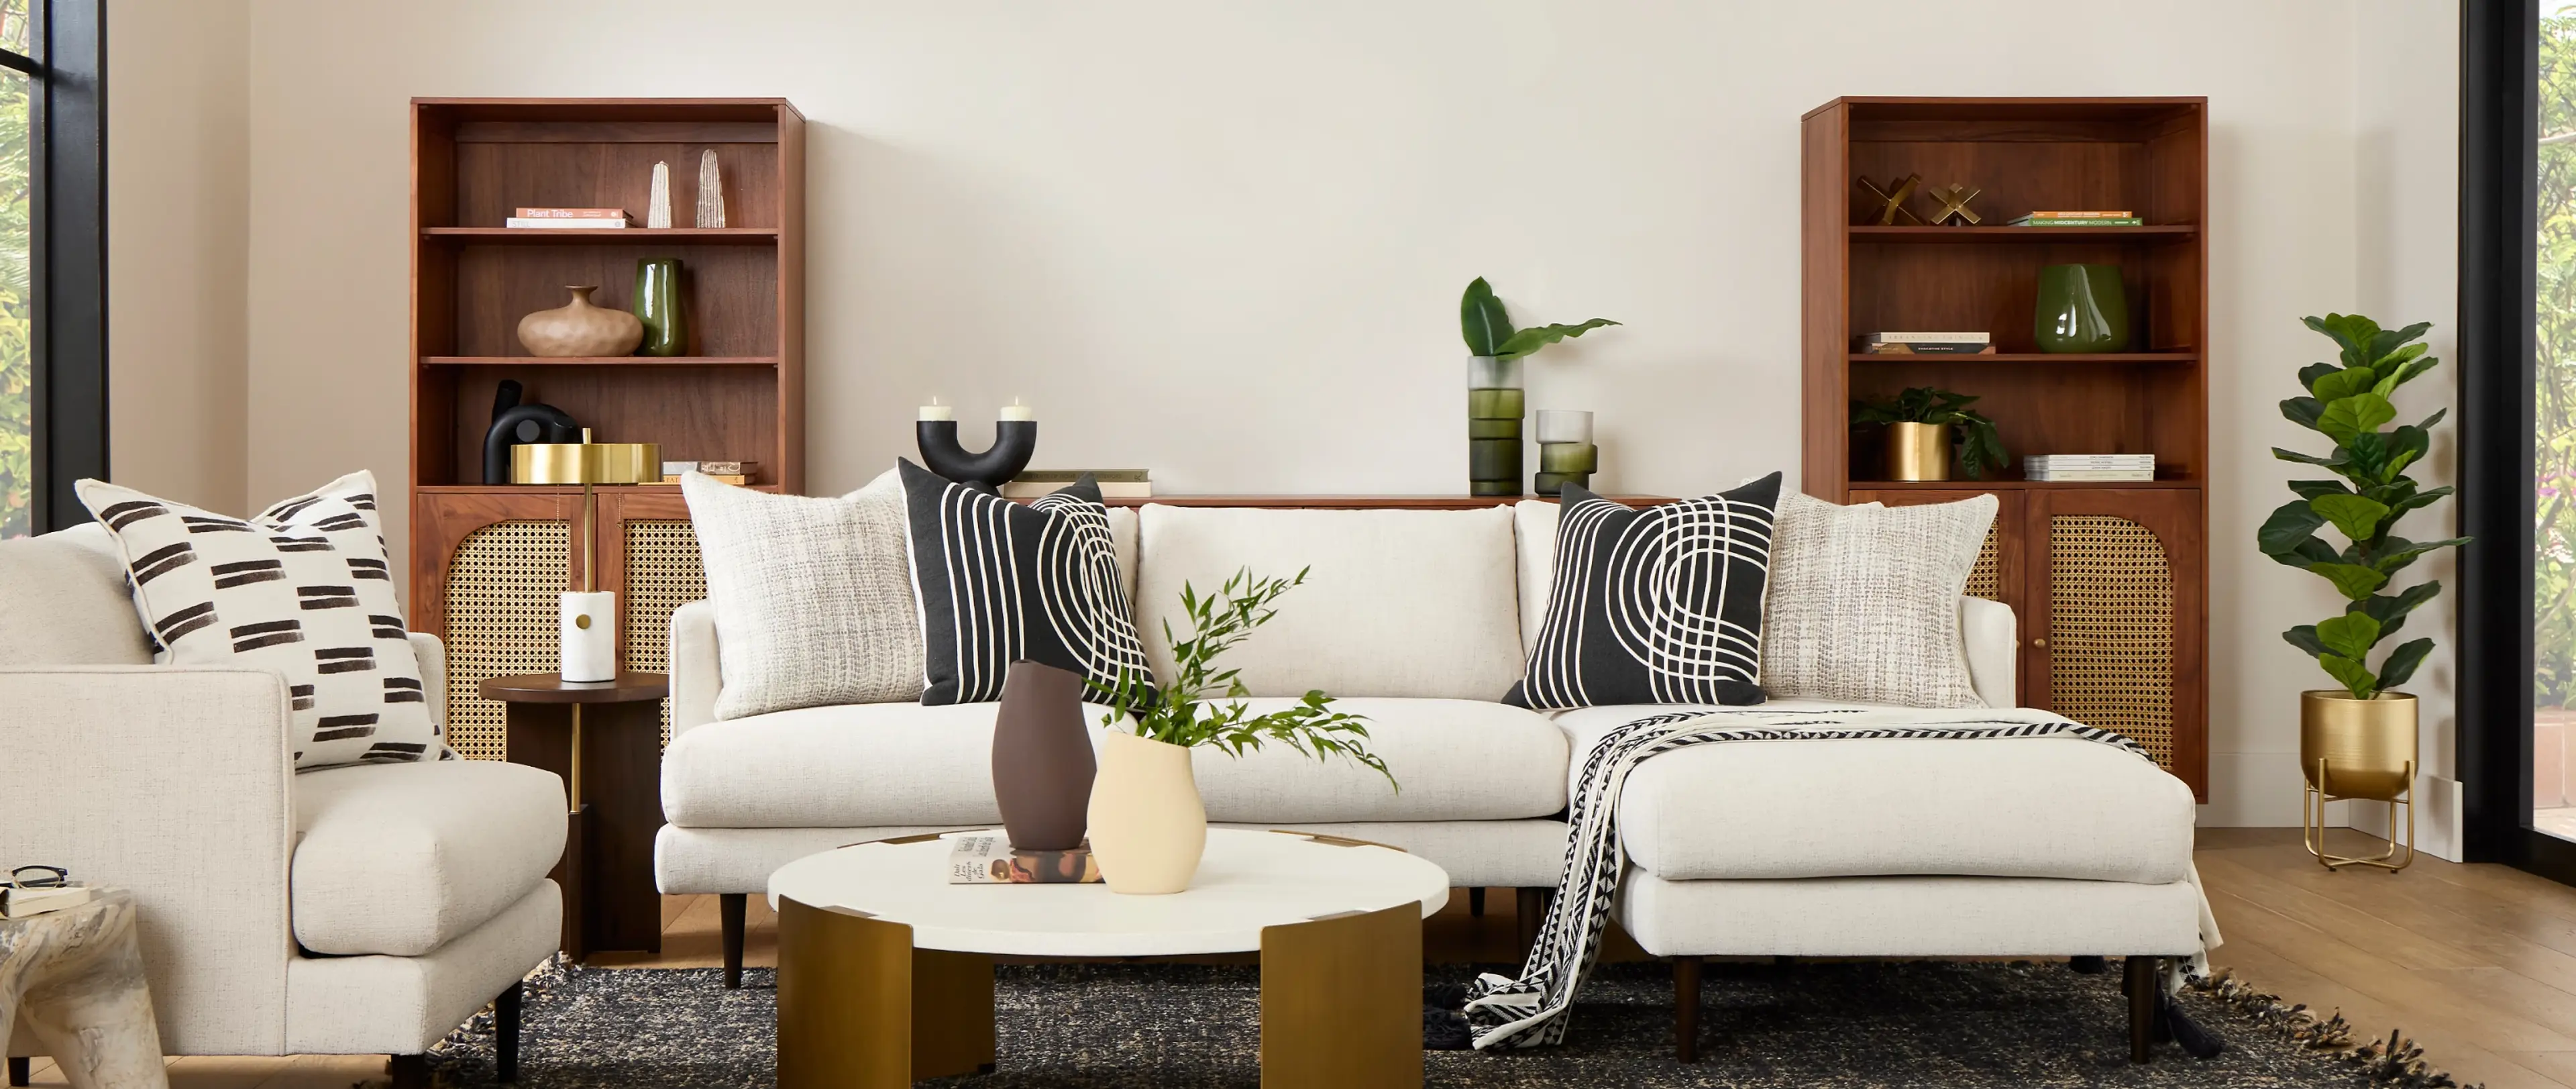 Up to 20% Off Living Room*